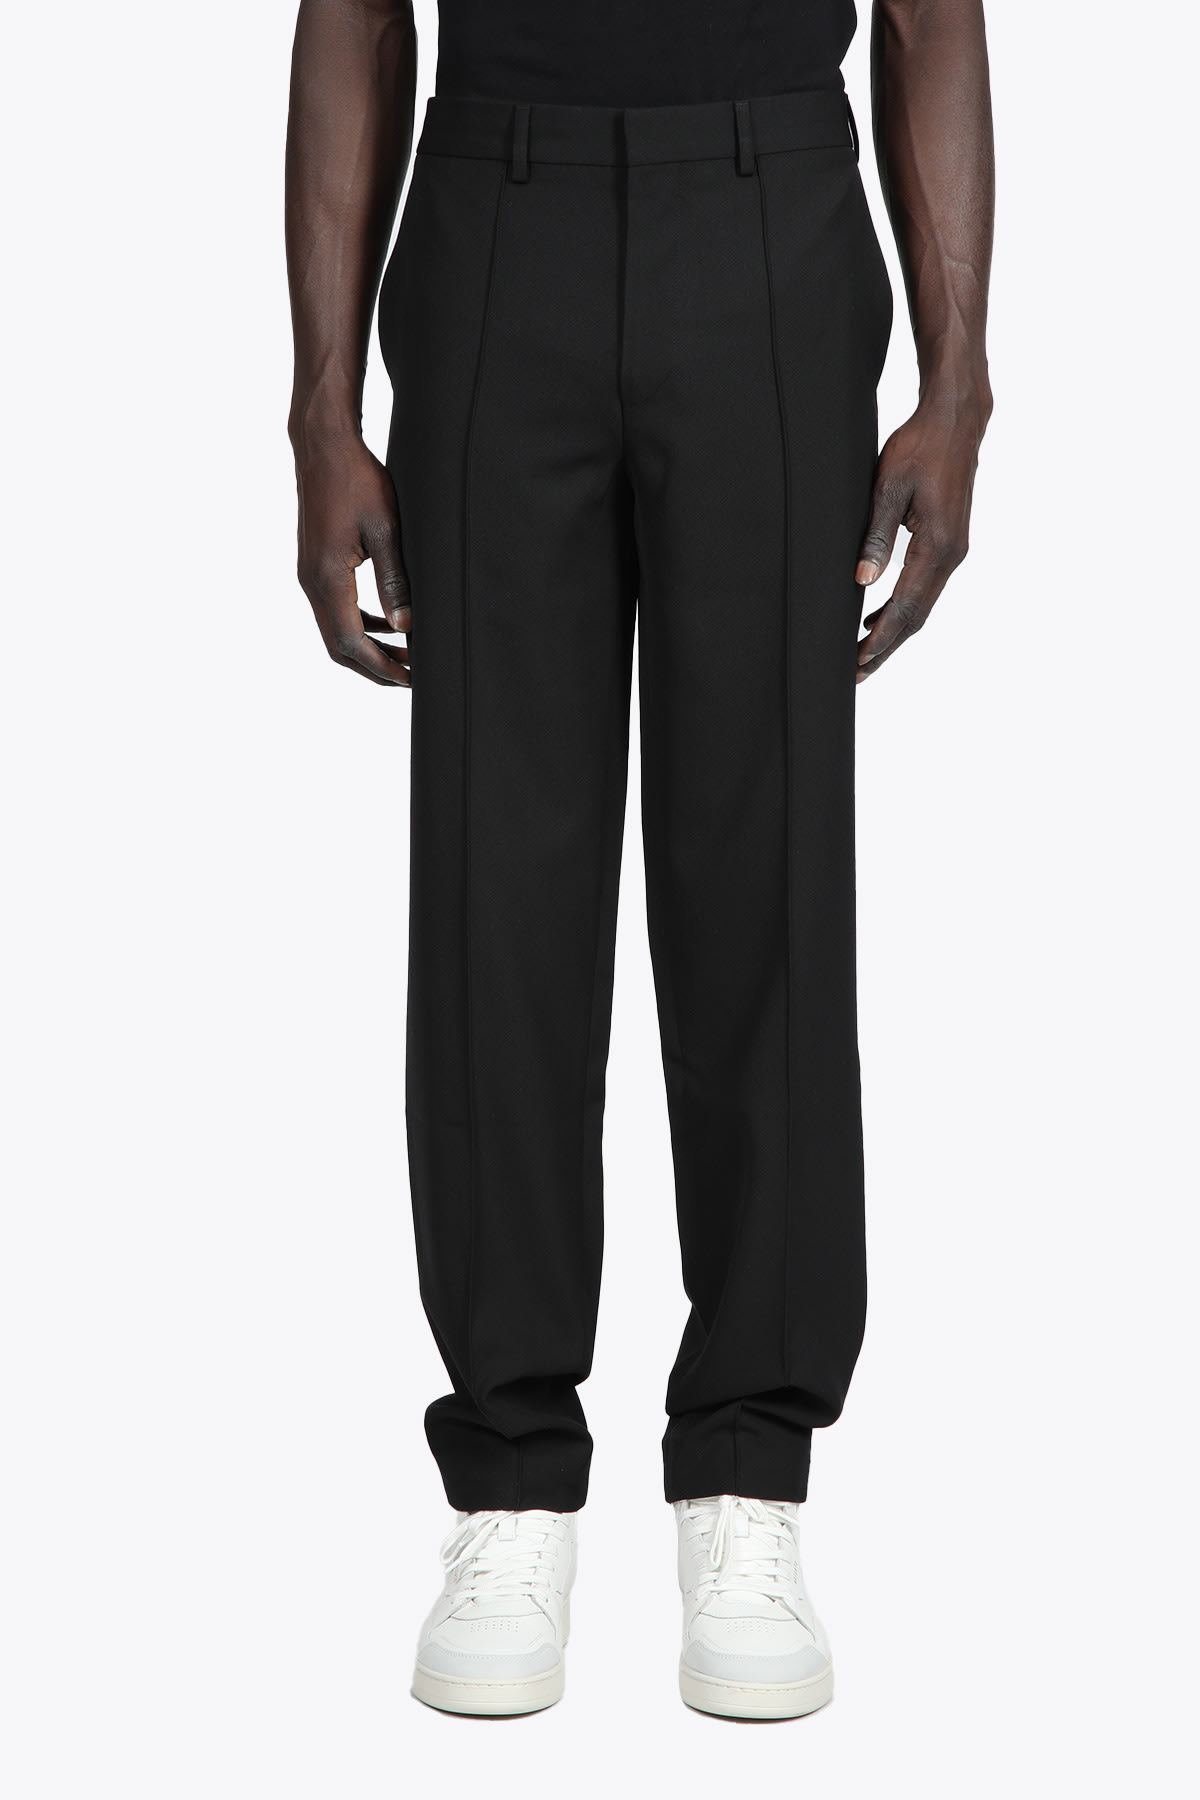 Axel Arigato Supper Straight Wool Trousers Black wool tailored pant - Supper Straight Wool Trousers